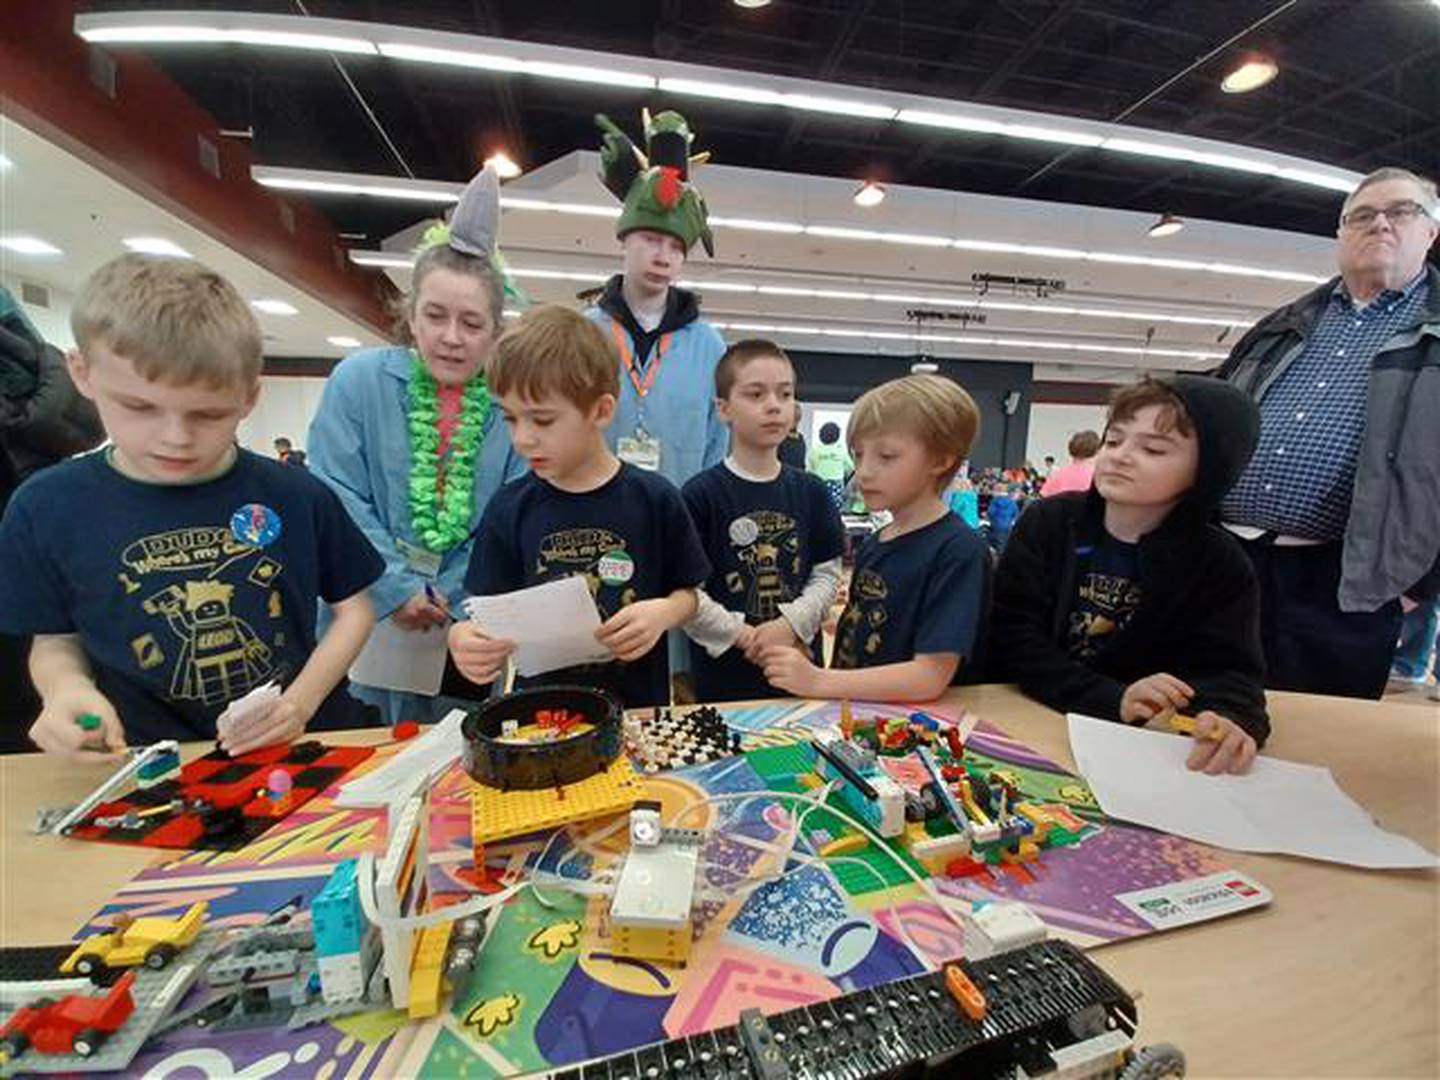 Fox Valley Robotics LegoWolves Division composed of first through third-graders participated in FIRST Lego League Explorer Open House on March 17 with 12 FVR teams to depict the theme "Masterpiece."